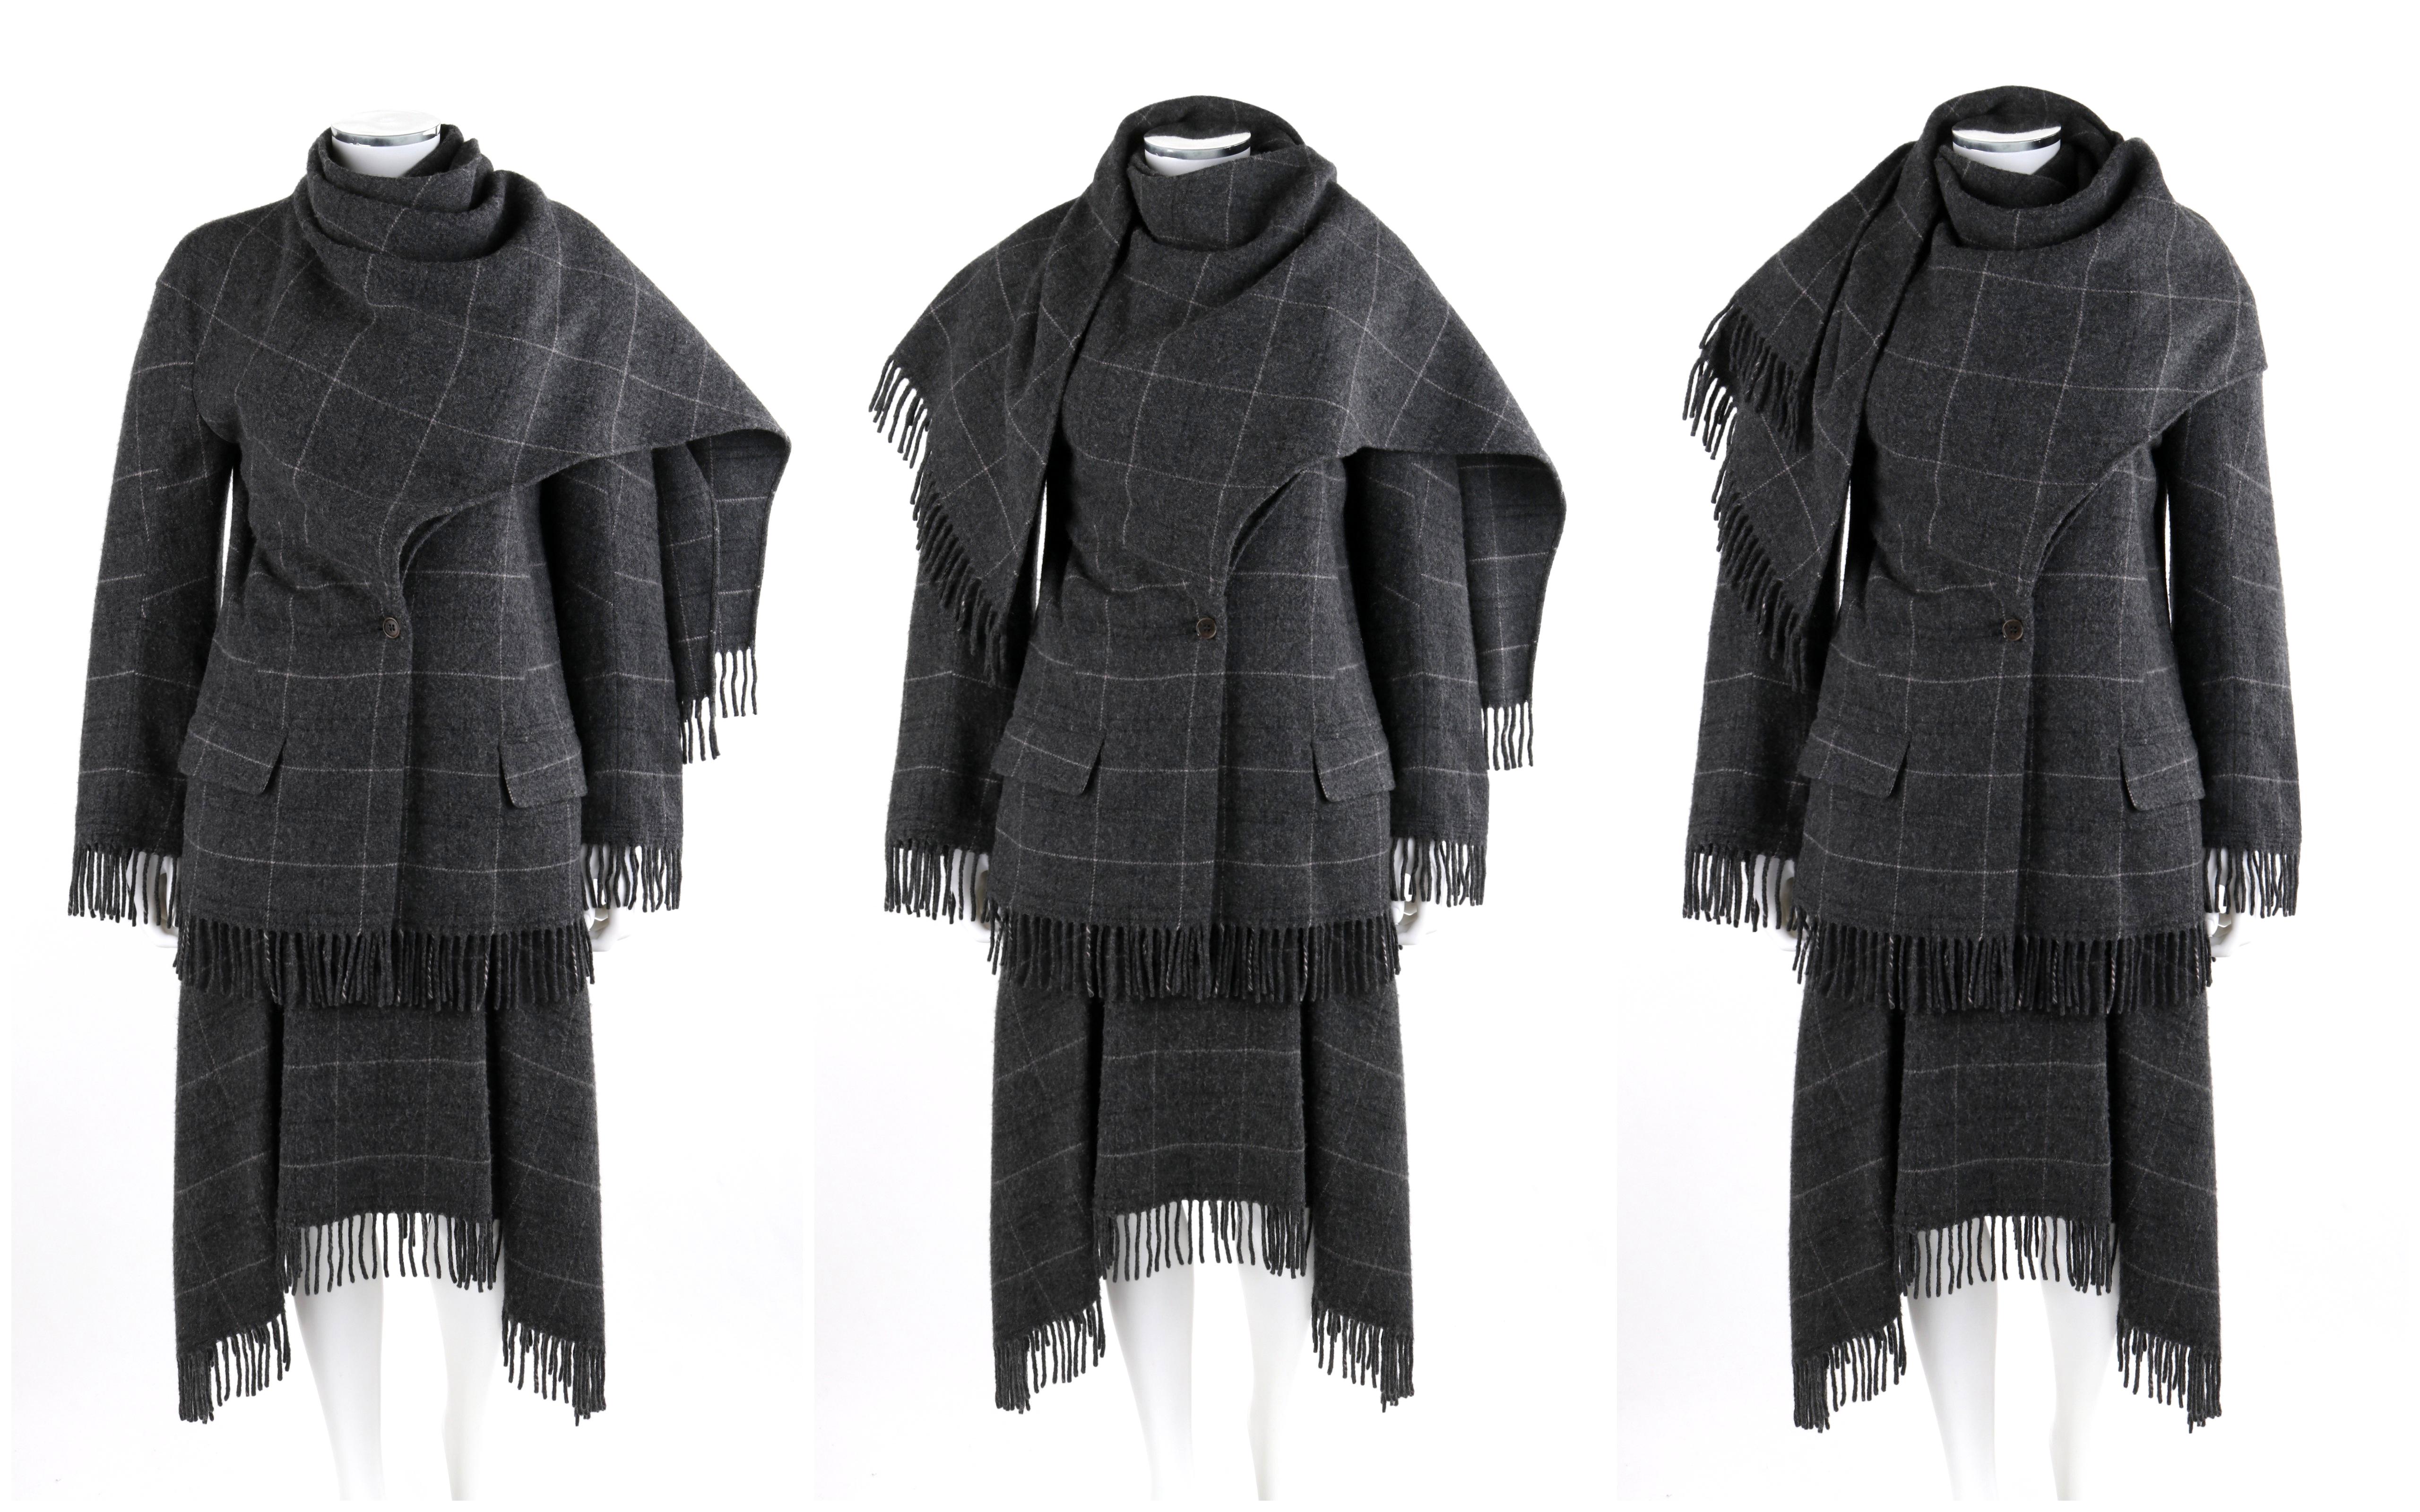 ALEXANDER McQUEEN A/W 1999 “The Overlook” Gray Check Fringe Jacket Skirt Set

Brand / Manufacturer: Alexander McQueen
Collection: A/W 1999 “The Overlook”
Designer: Alexander McQueen
Style: Jacket and skirt set
Color(s): Shades of gray, black, and